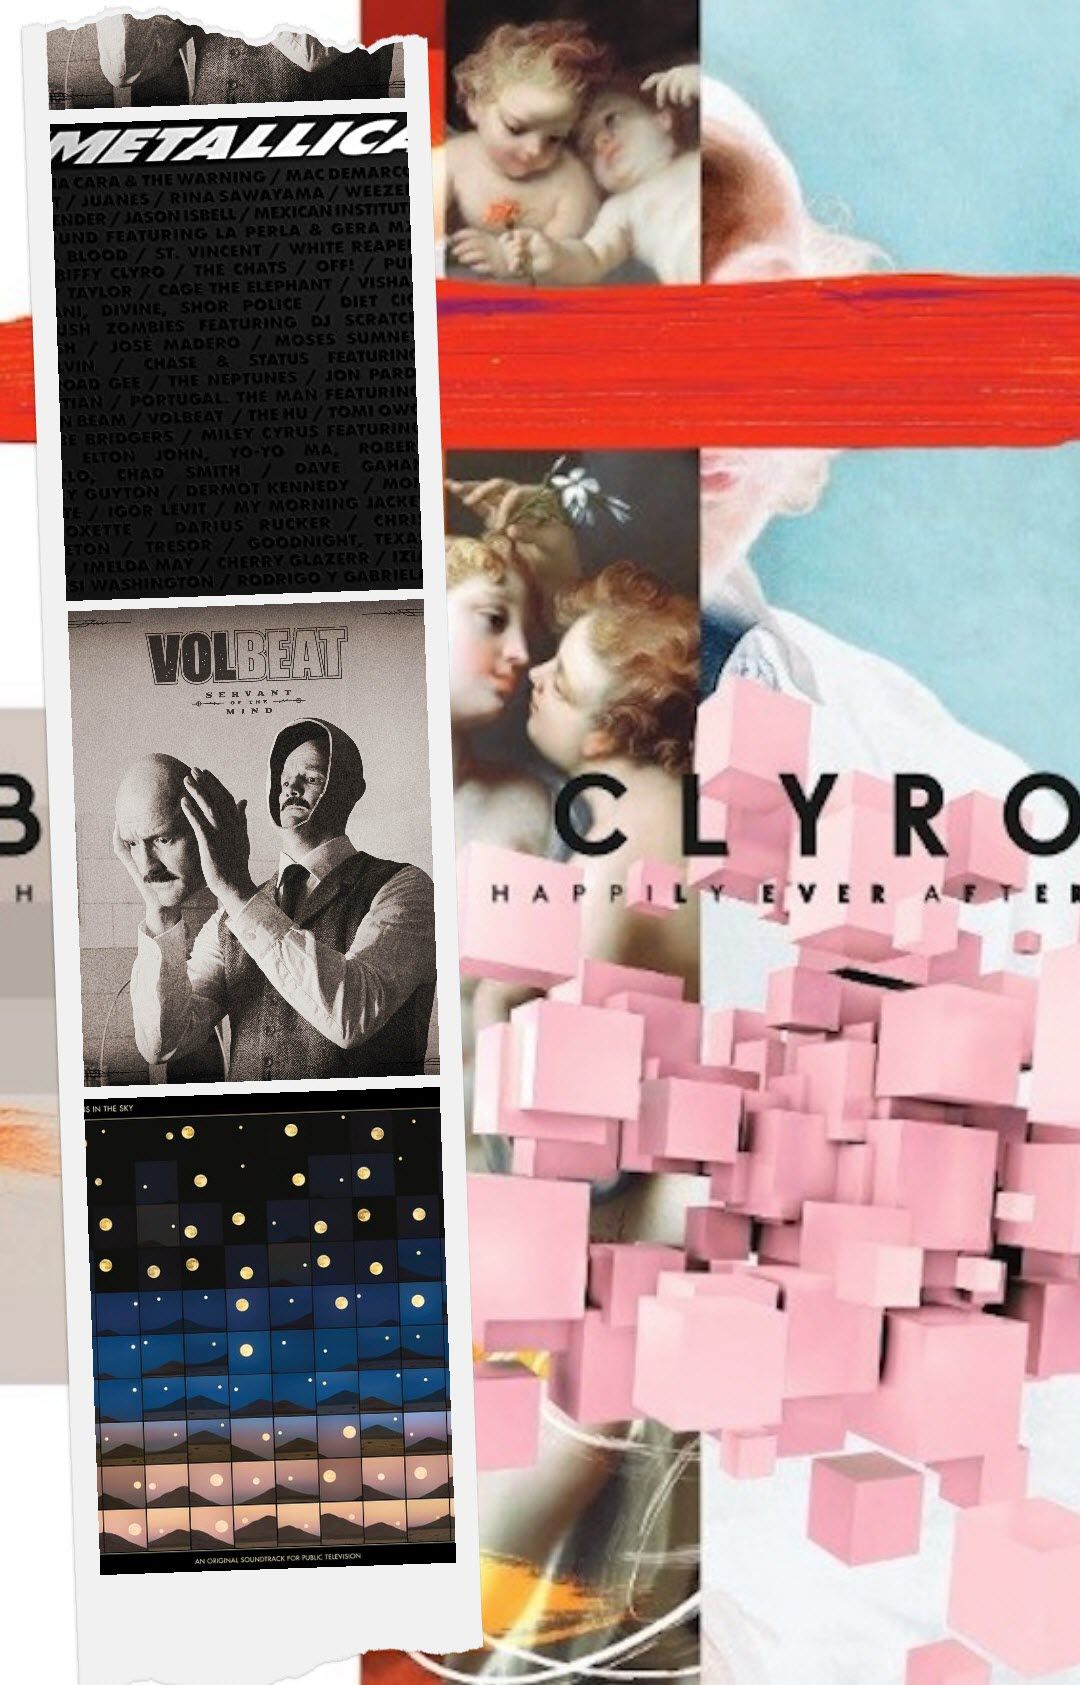 A collage of music album covers including Metallica, Clyro and Volbeat. - Spotify